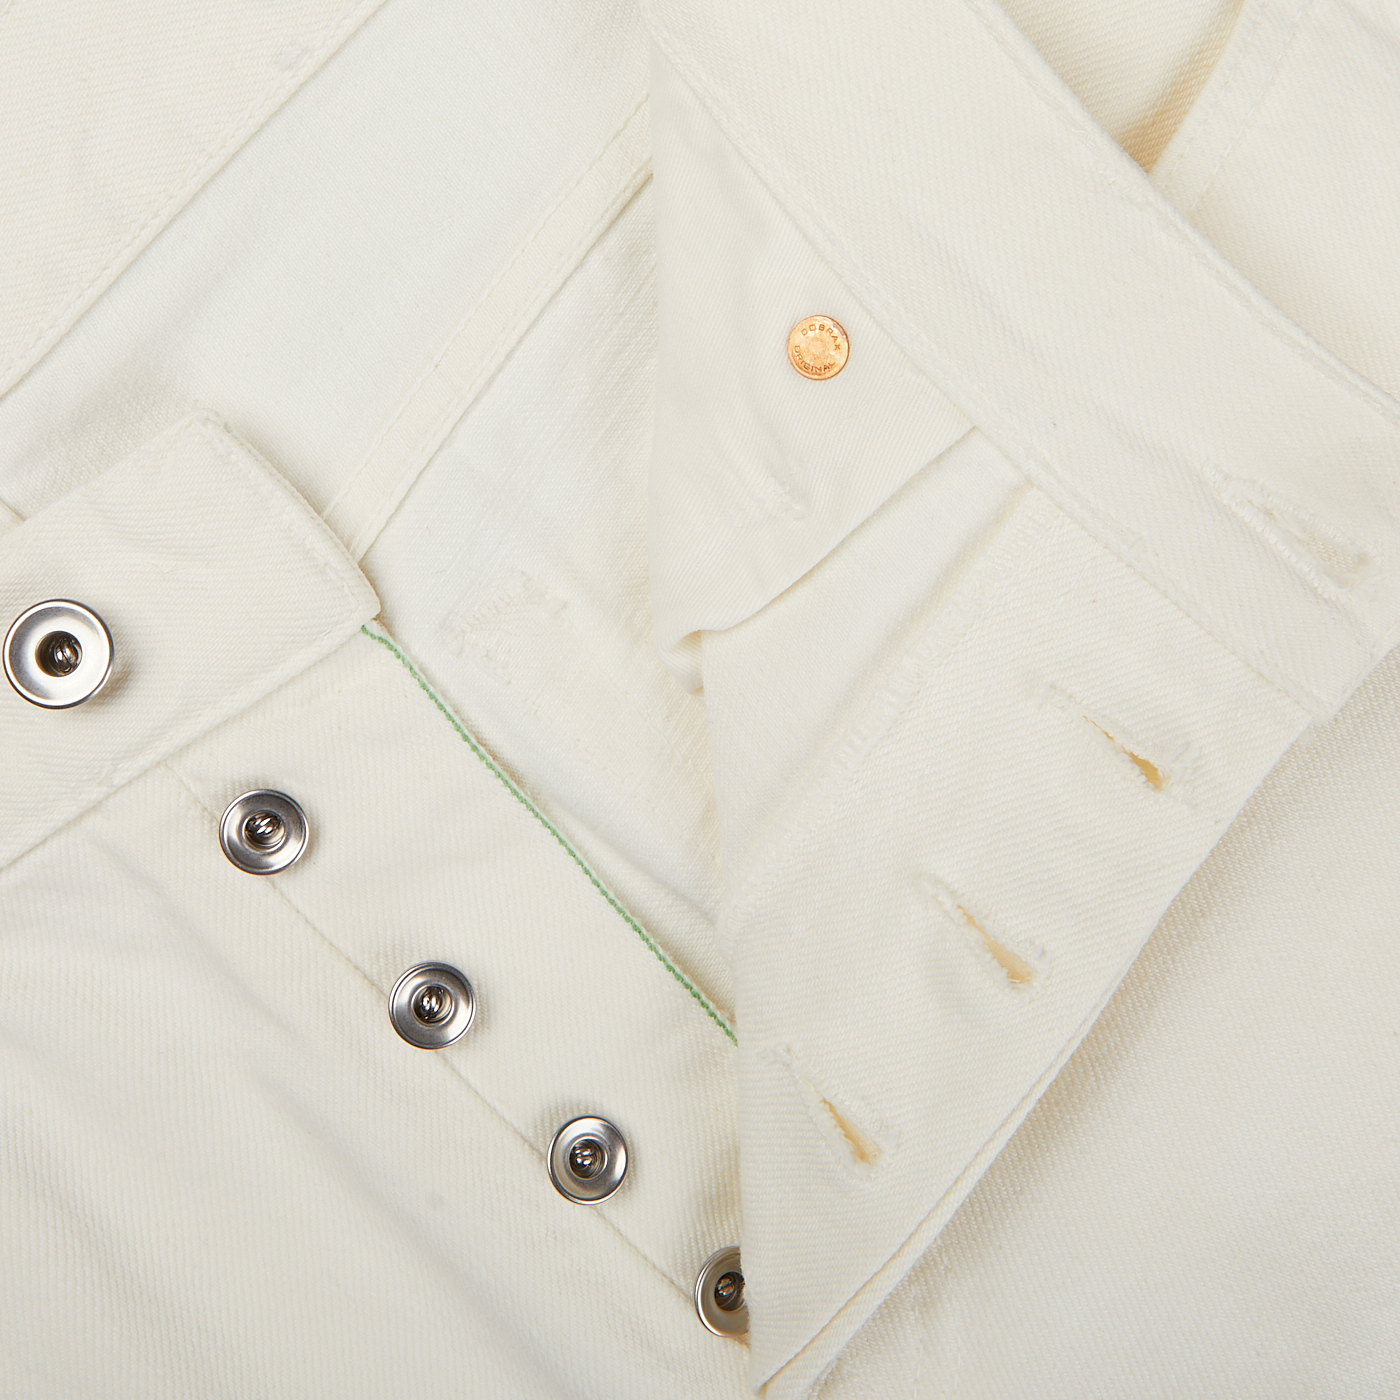 Close-up of a white Ecru Stone Washed Kuroki Cotton M5 Jeans garment with a gold button and multiple silver snap fasteners by C.O.F Studio.